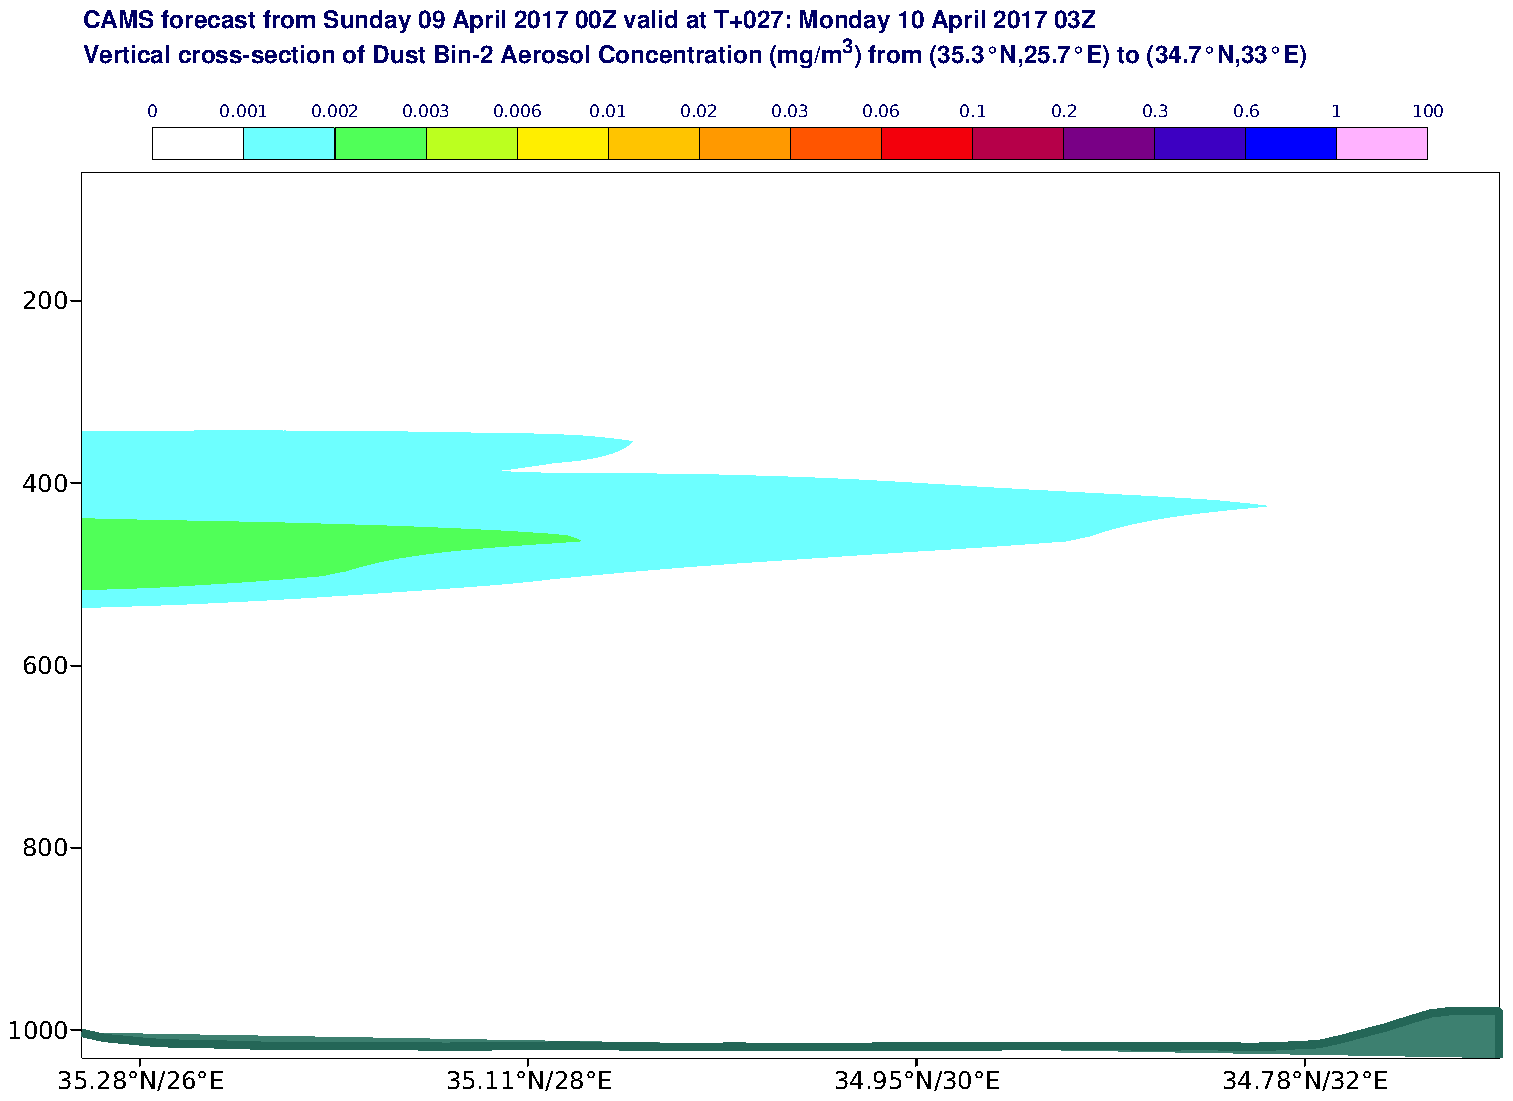 Vertical cross-section of Dust Bin-2 Aerosol Concentration (mg/m3) valid at T27 - 2017-04-10 03:00